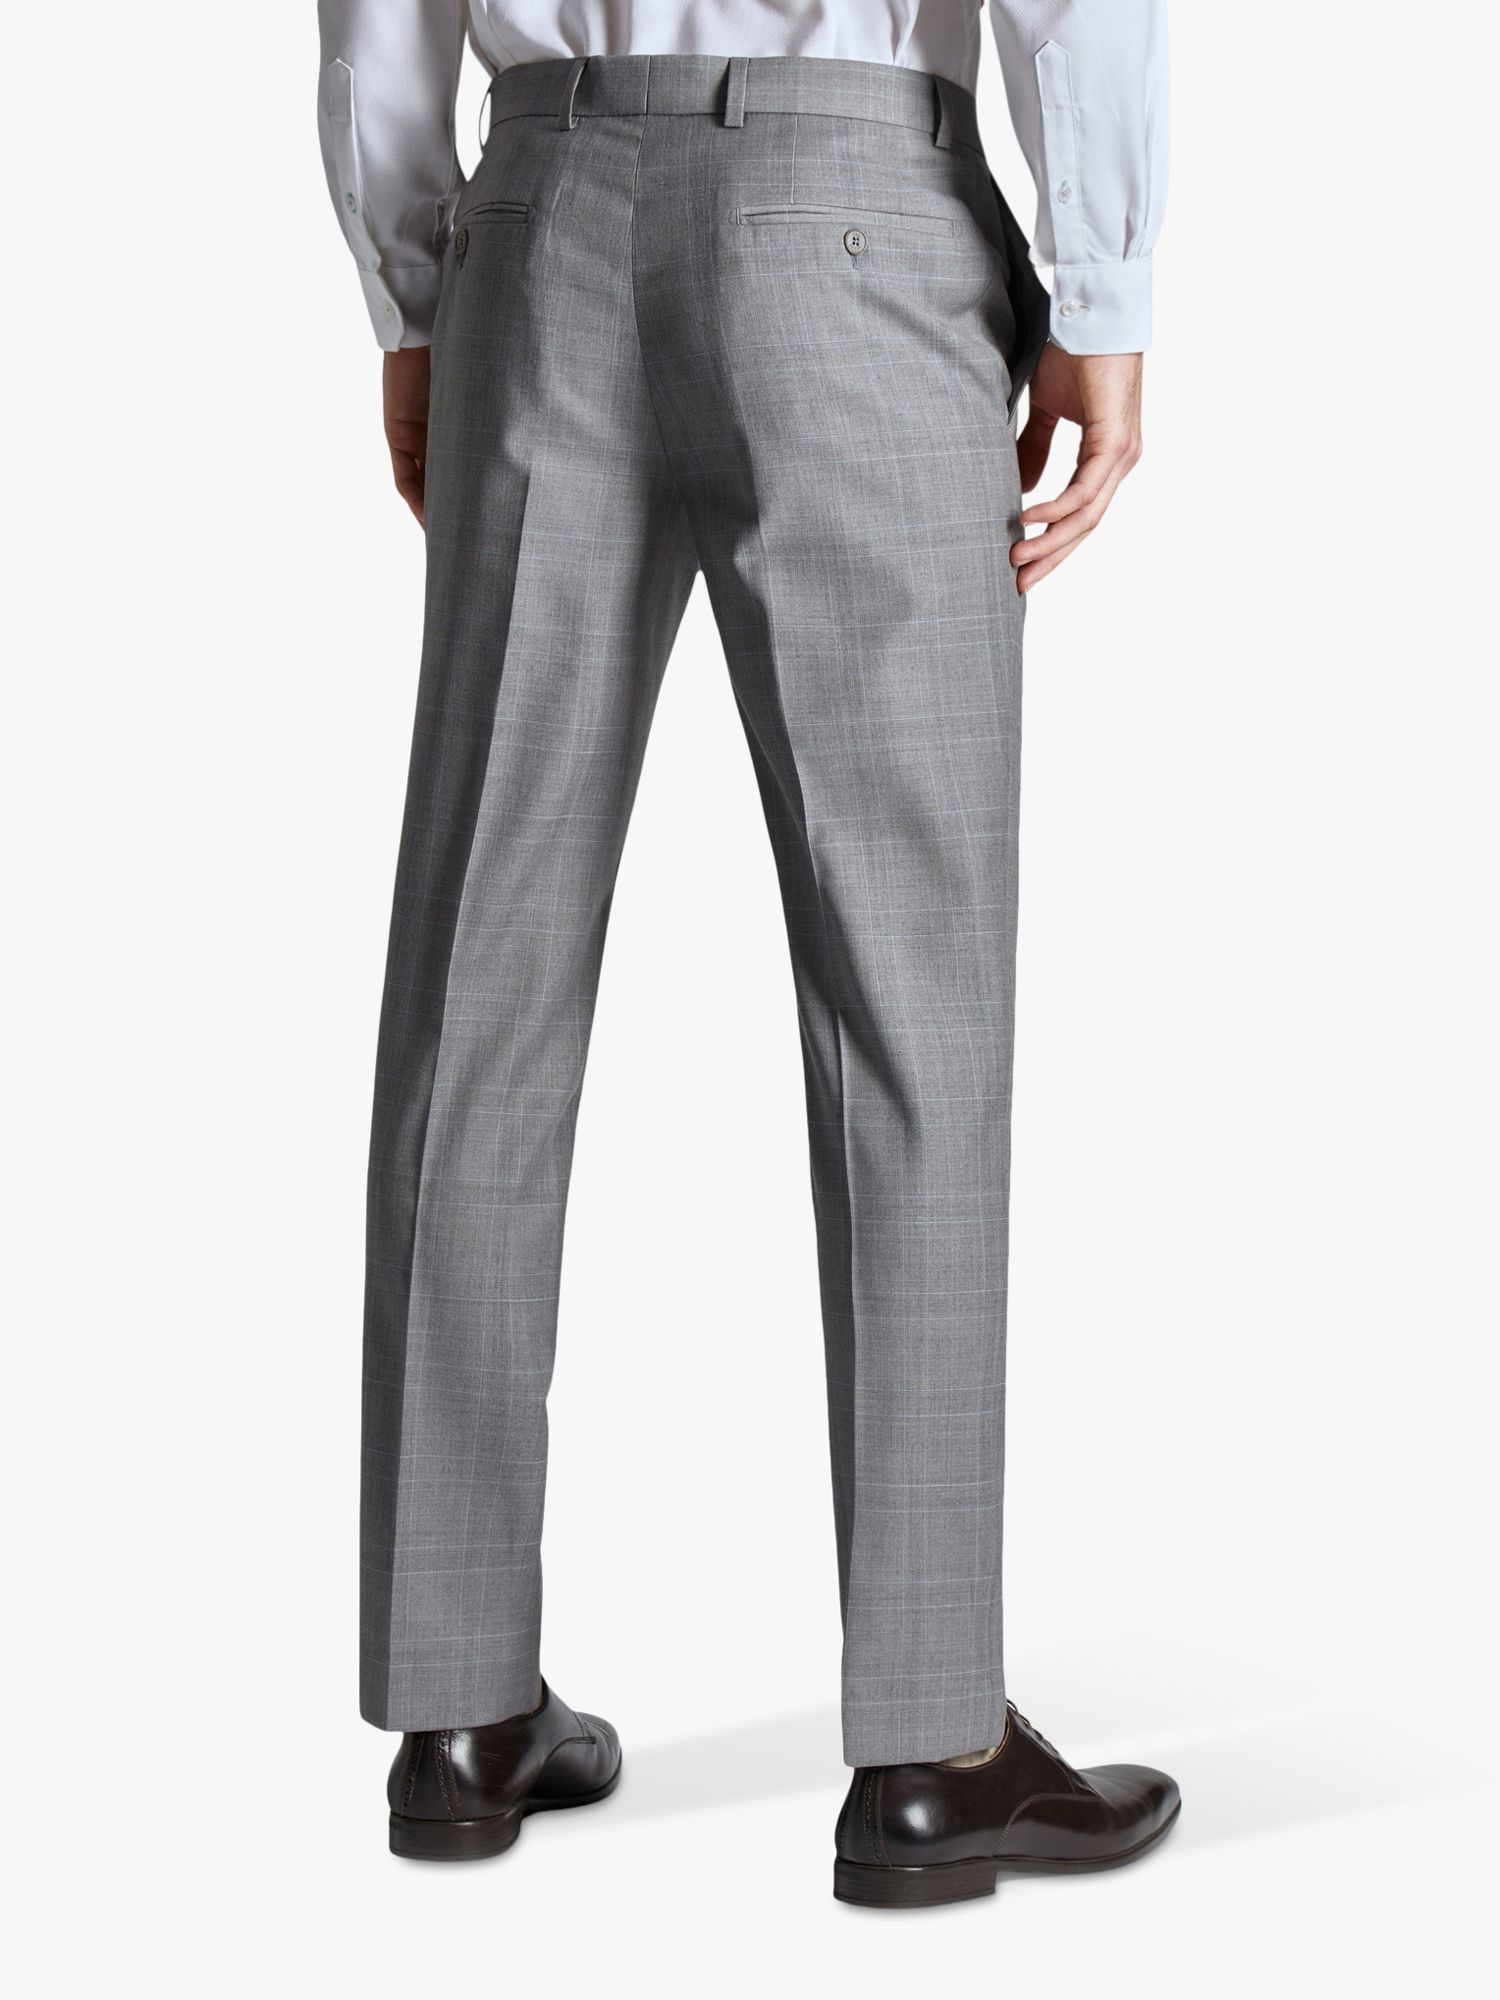 Buy Ted Baker Soft Check Slim Fit Wool Blend Trousers, Grey Online at johnlewis.com